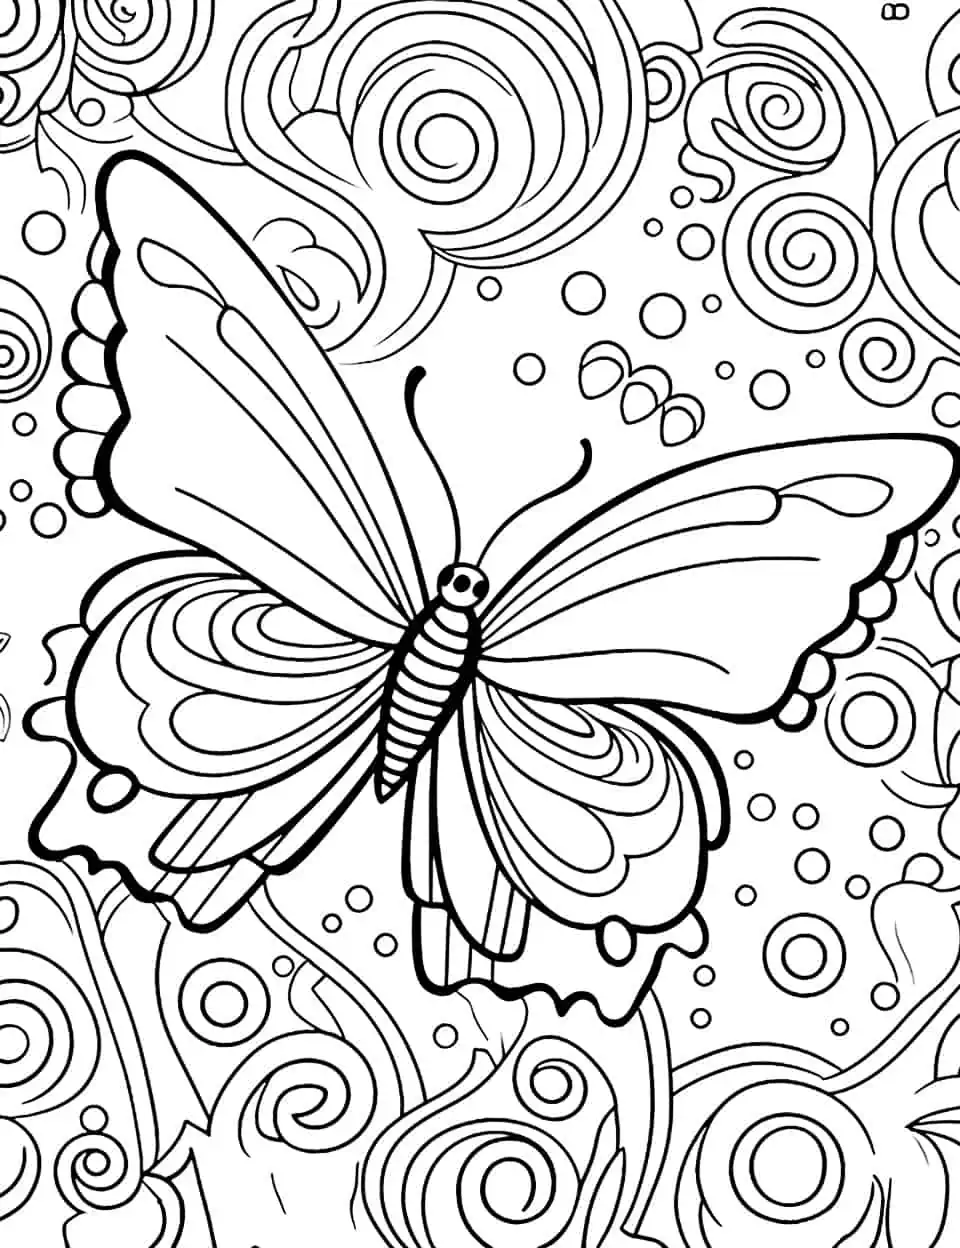 Cosmic Butterflies Butterfly Coloring Page - A coloring page featuring butterflies with celestial-themed patterns and cosmic backgrounds.